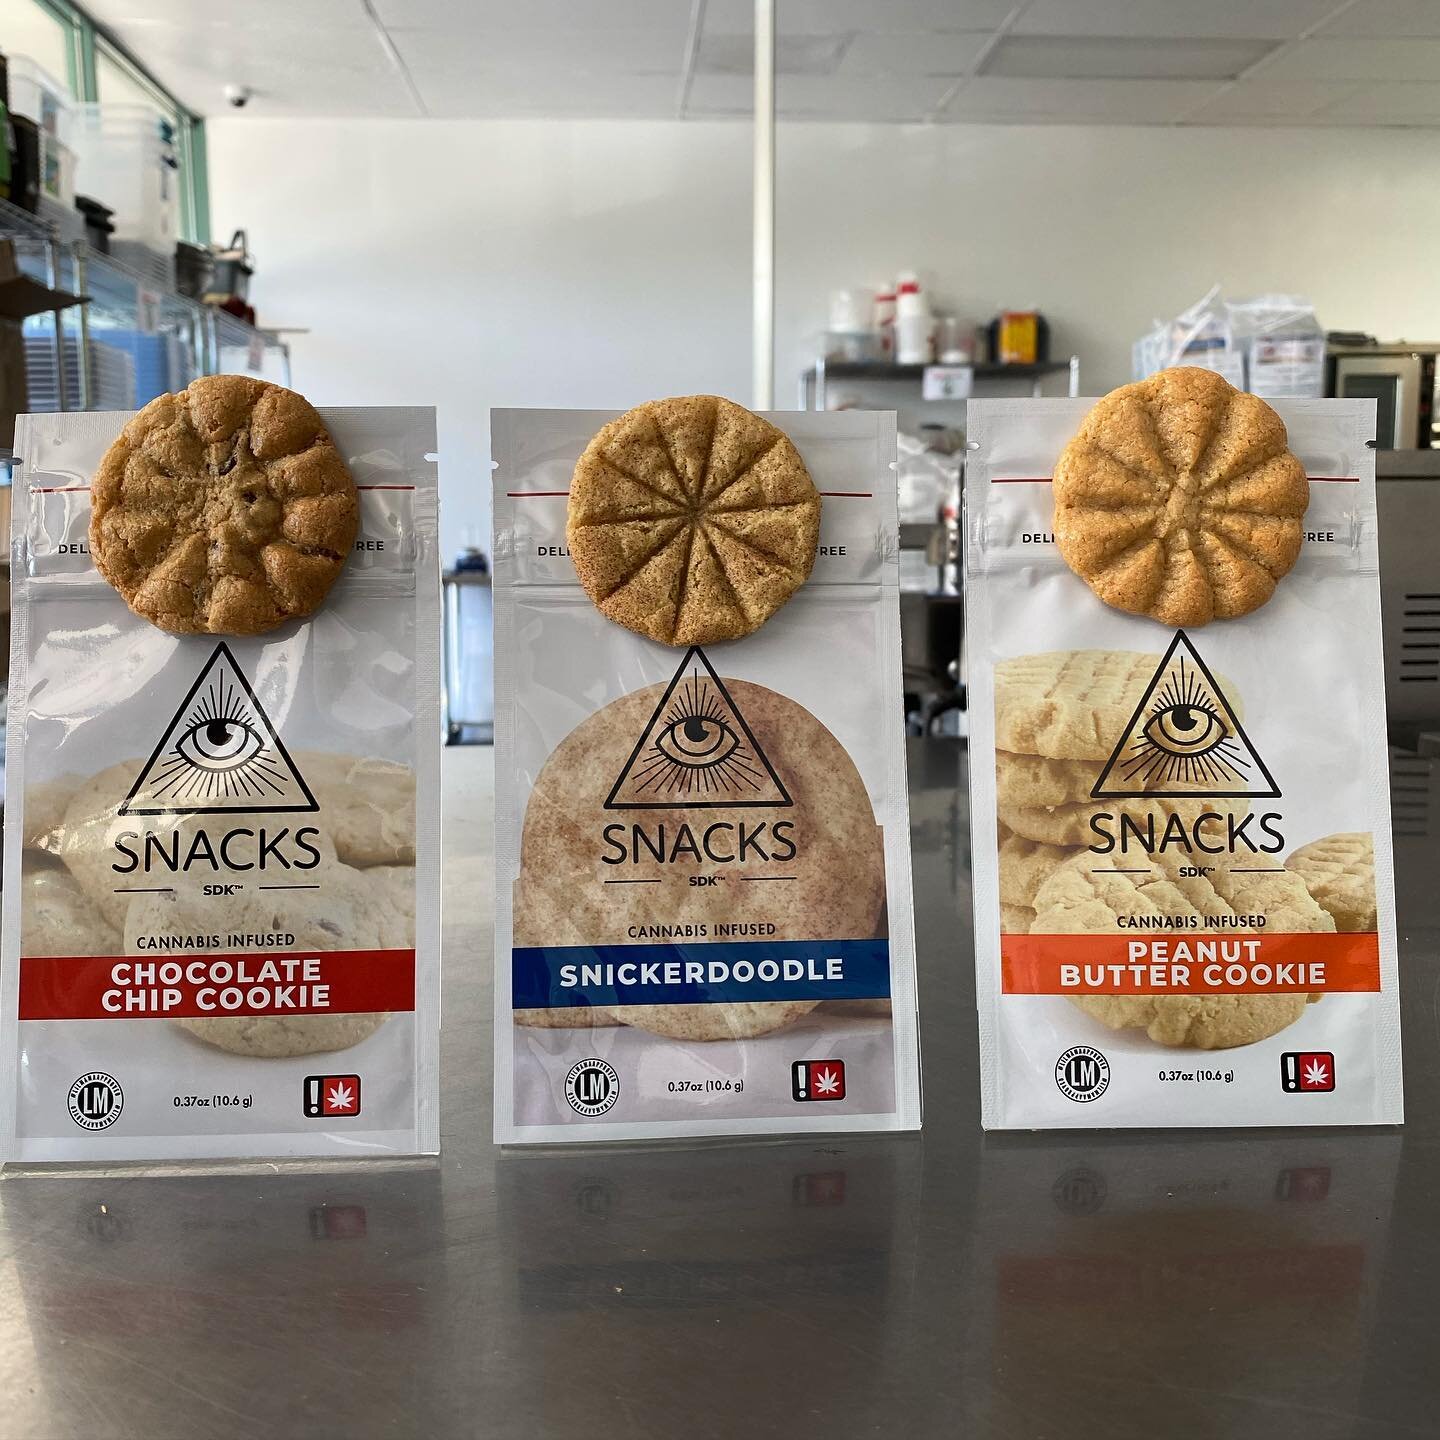 We have displays for your cases!  Go ahead and show off the best 100mg cookie in Oregon! ⭐️

#oregoncannabisretailers #eatcookies
#i❤️sdk #100mg #strainspecific #rso